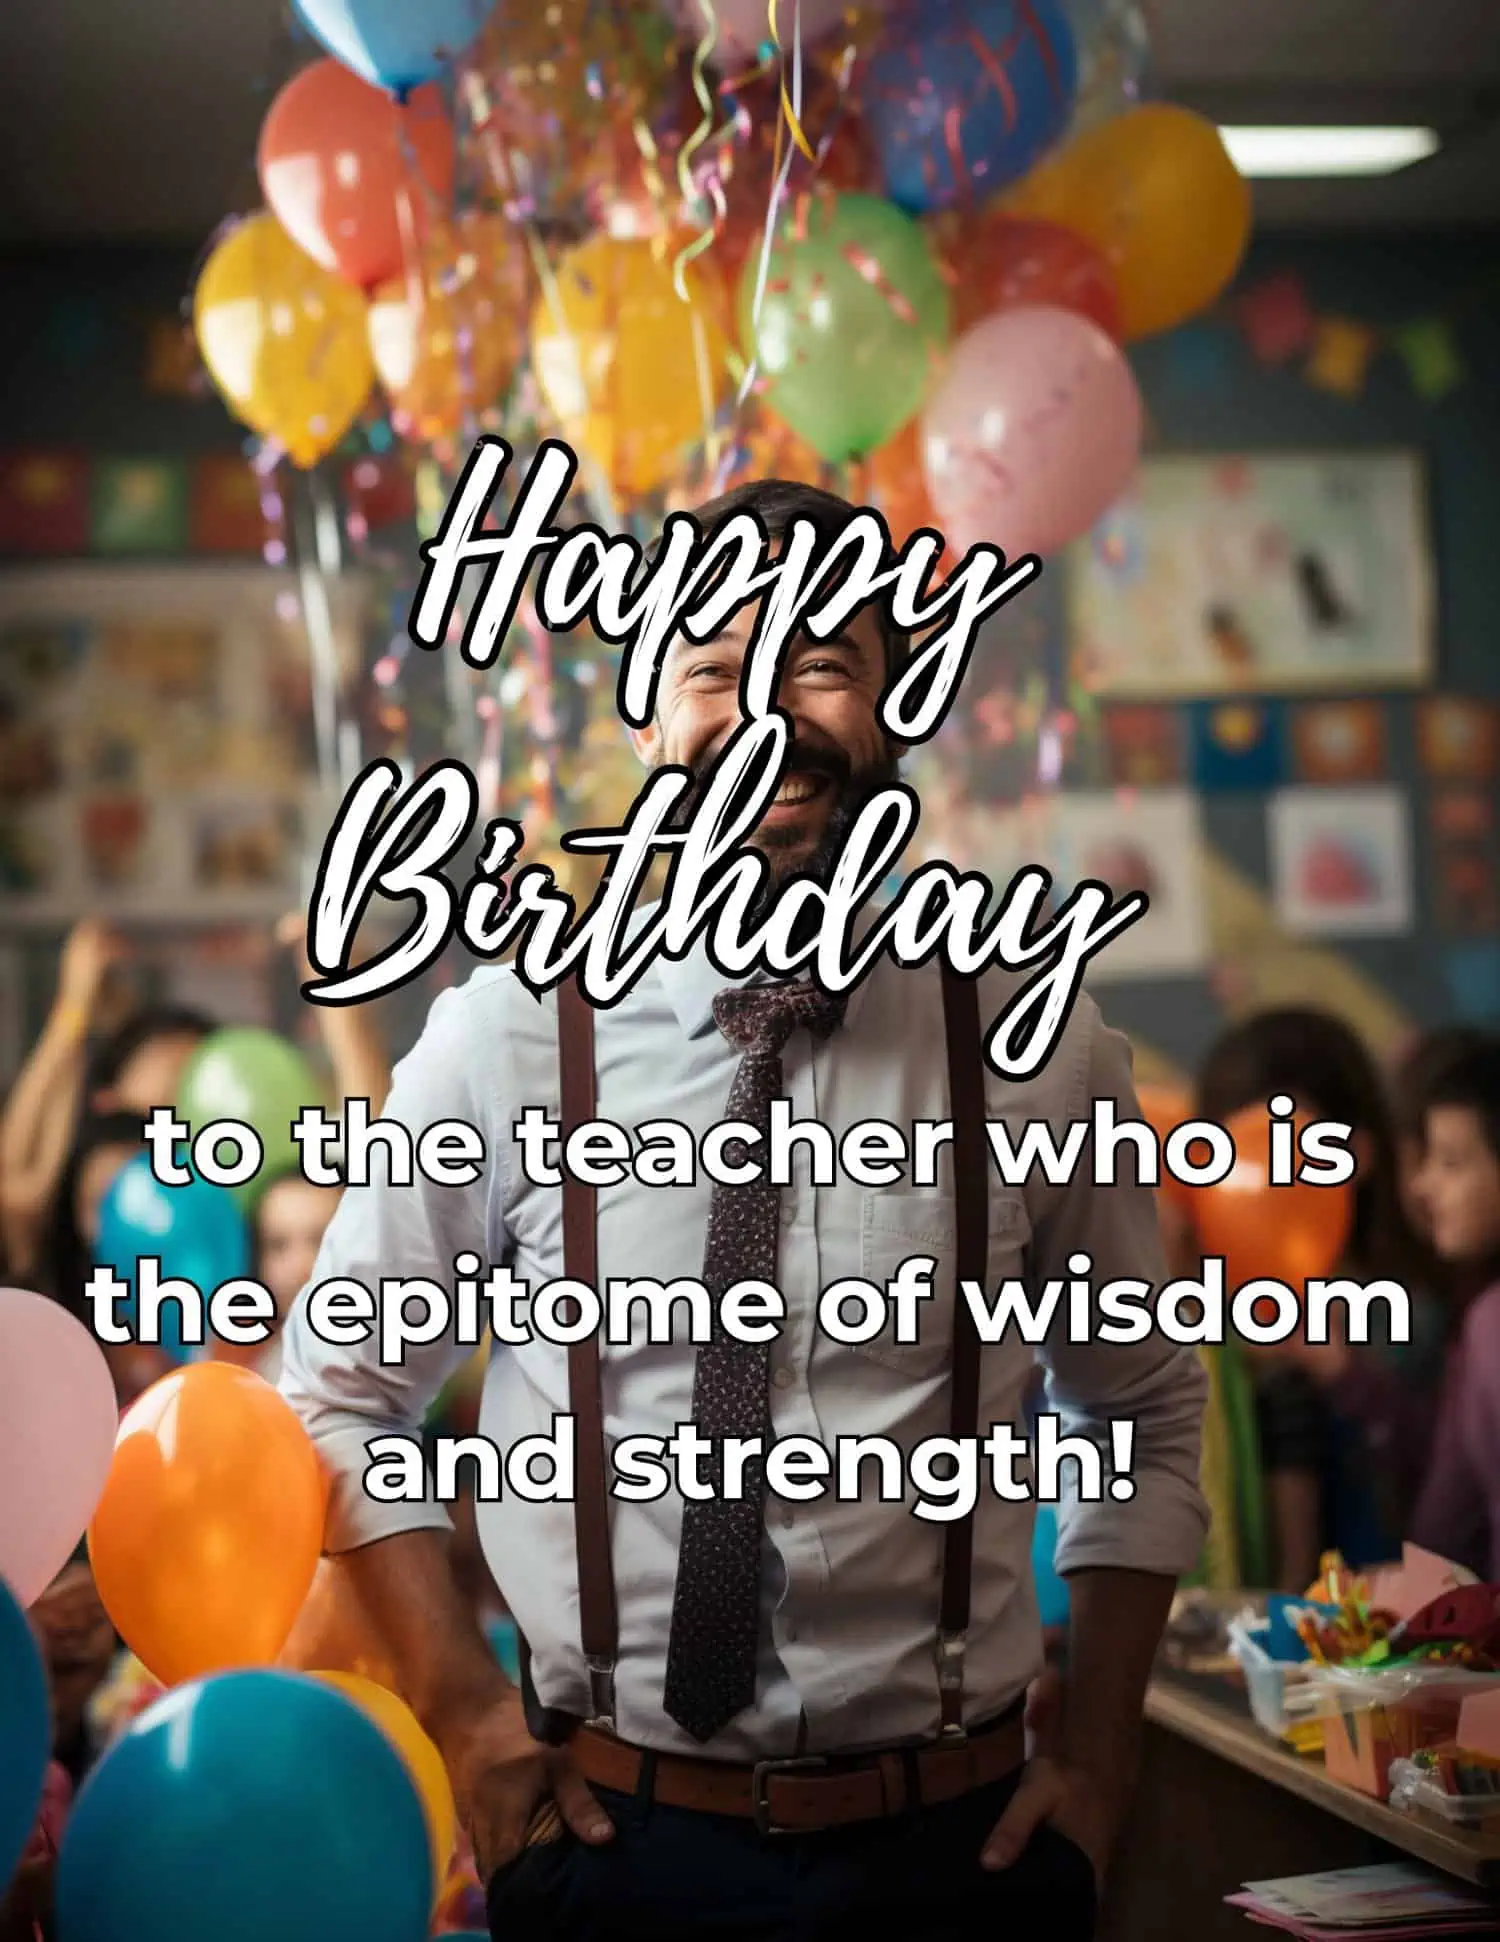 Heartfelt birthday greetings crafted especially for male educators.